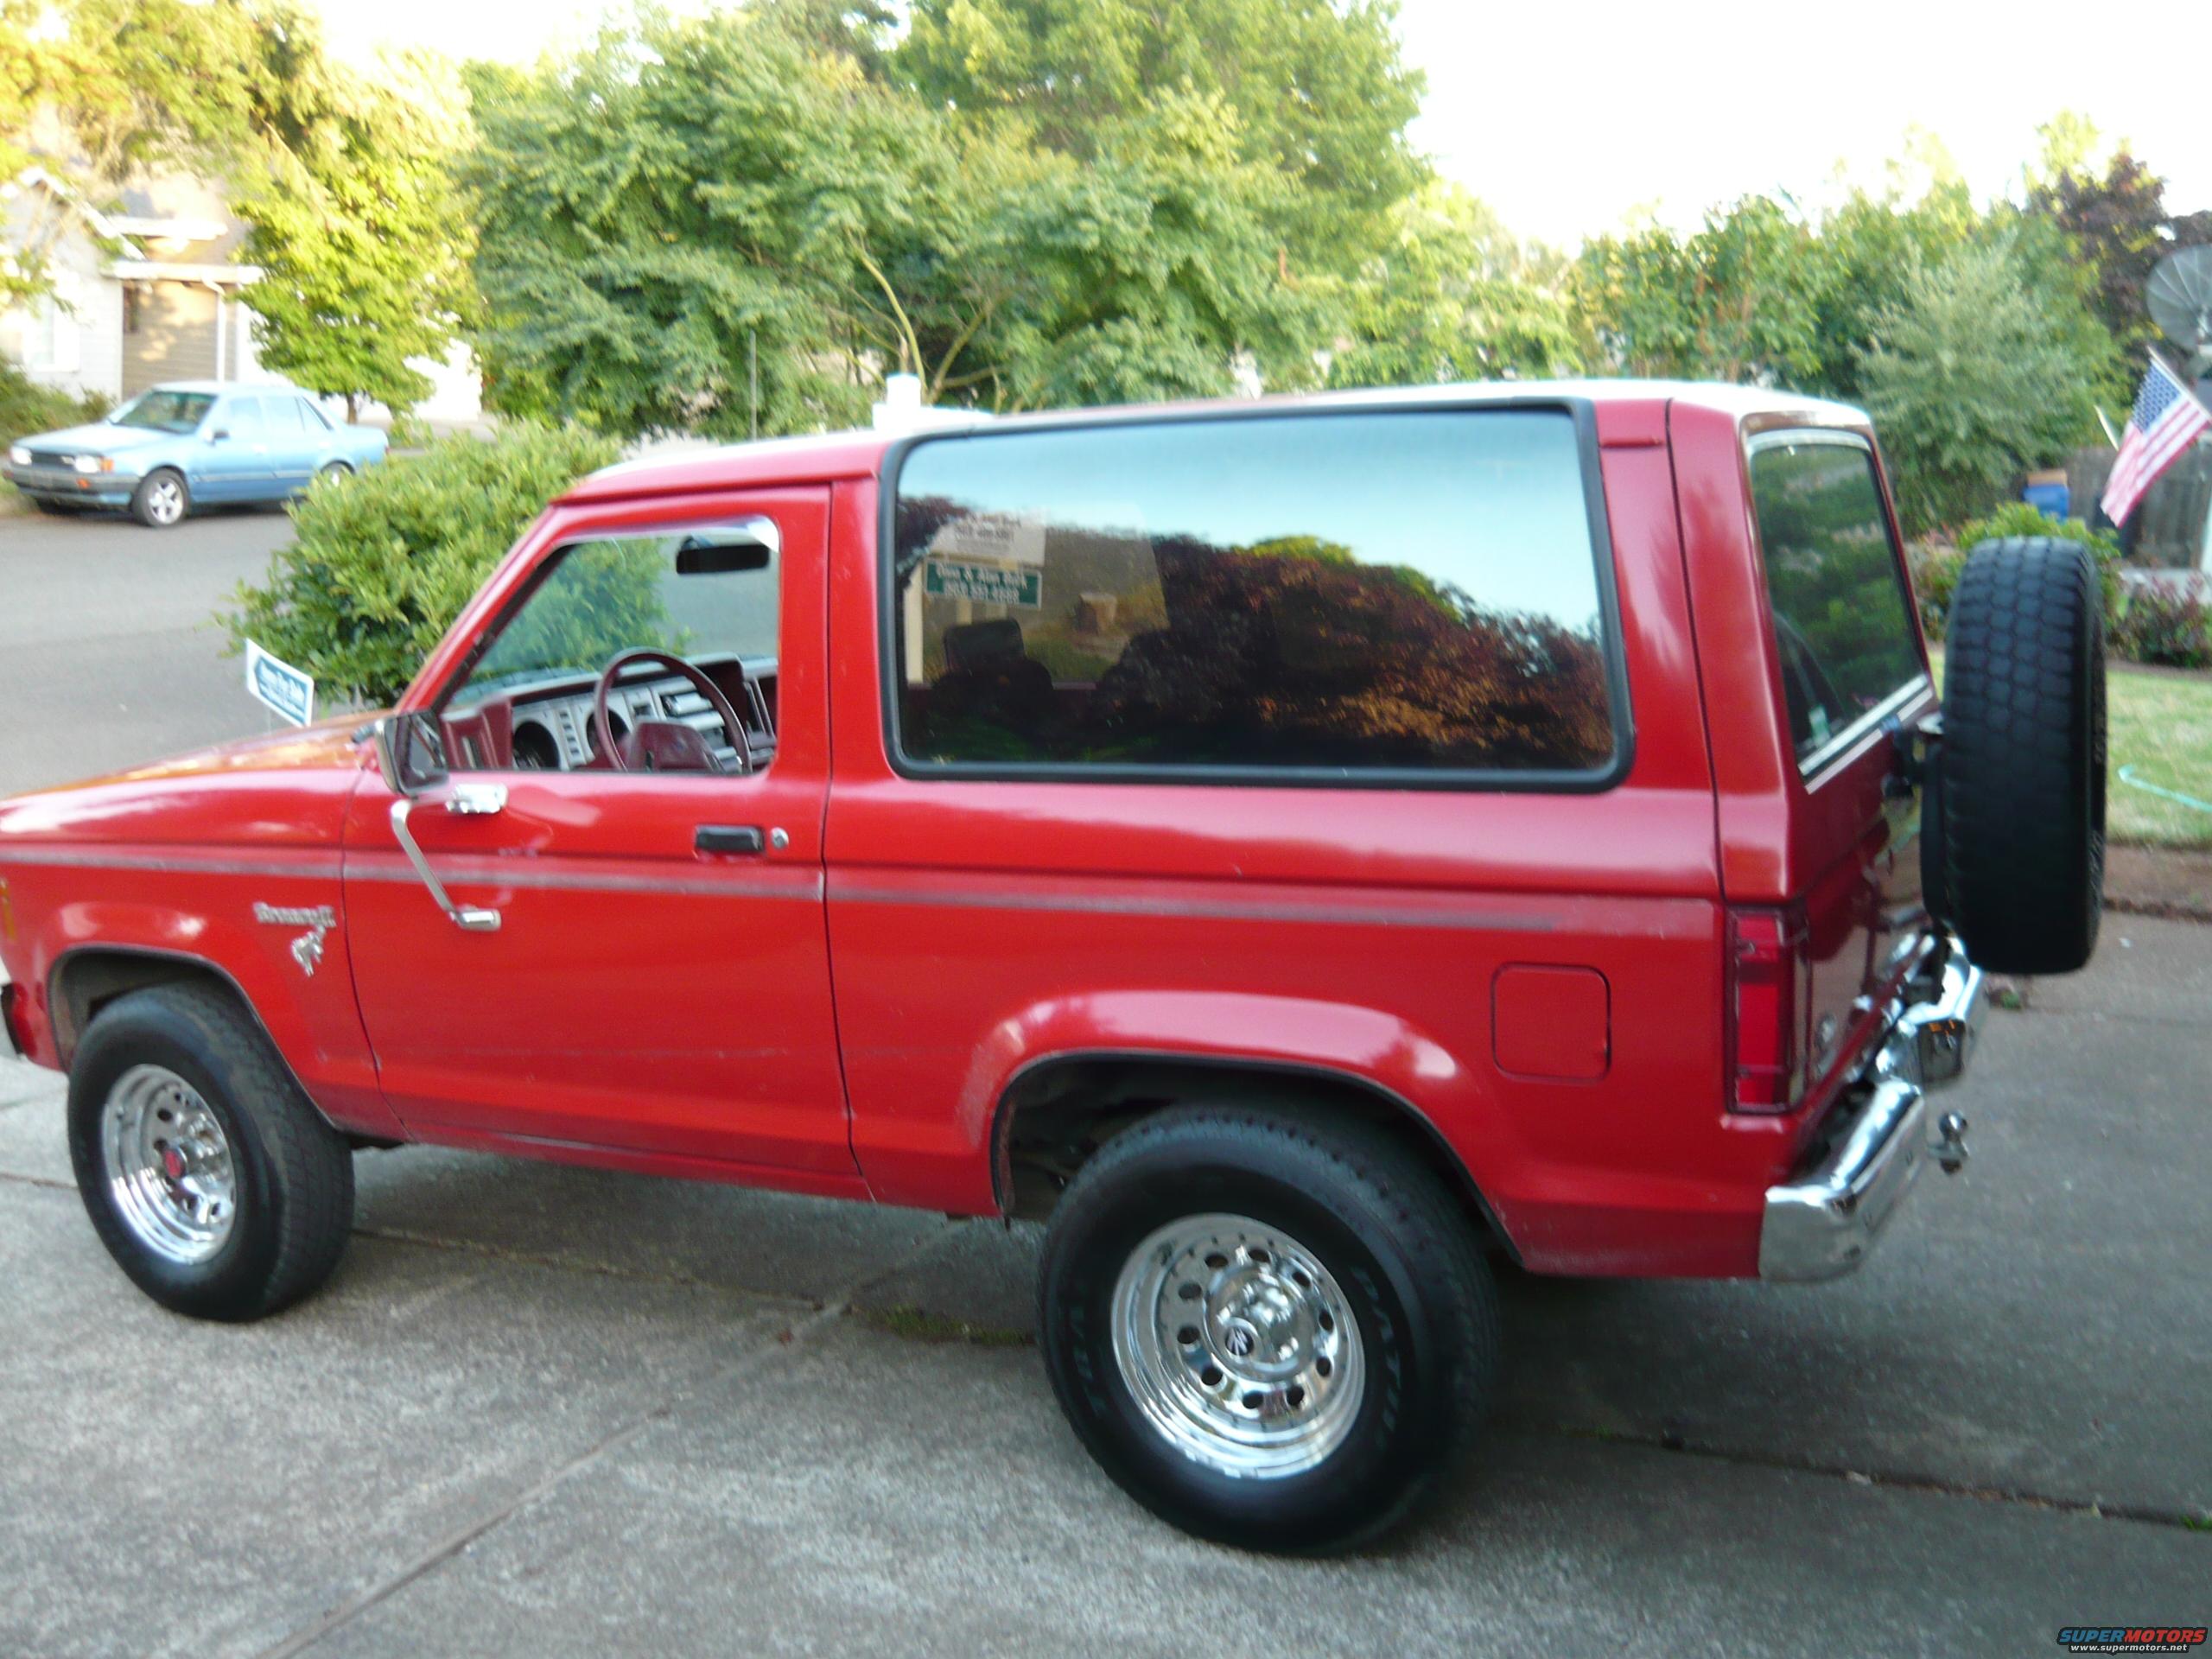 1985 ford bronco ii pictures photos videos and sounds supermotors net 1985 ford bronco ii pictures photos